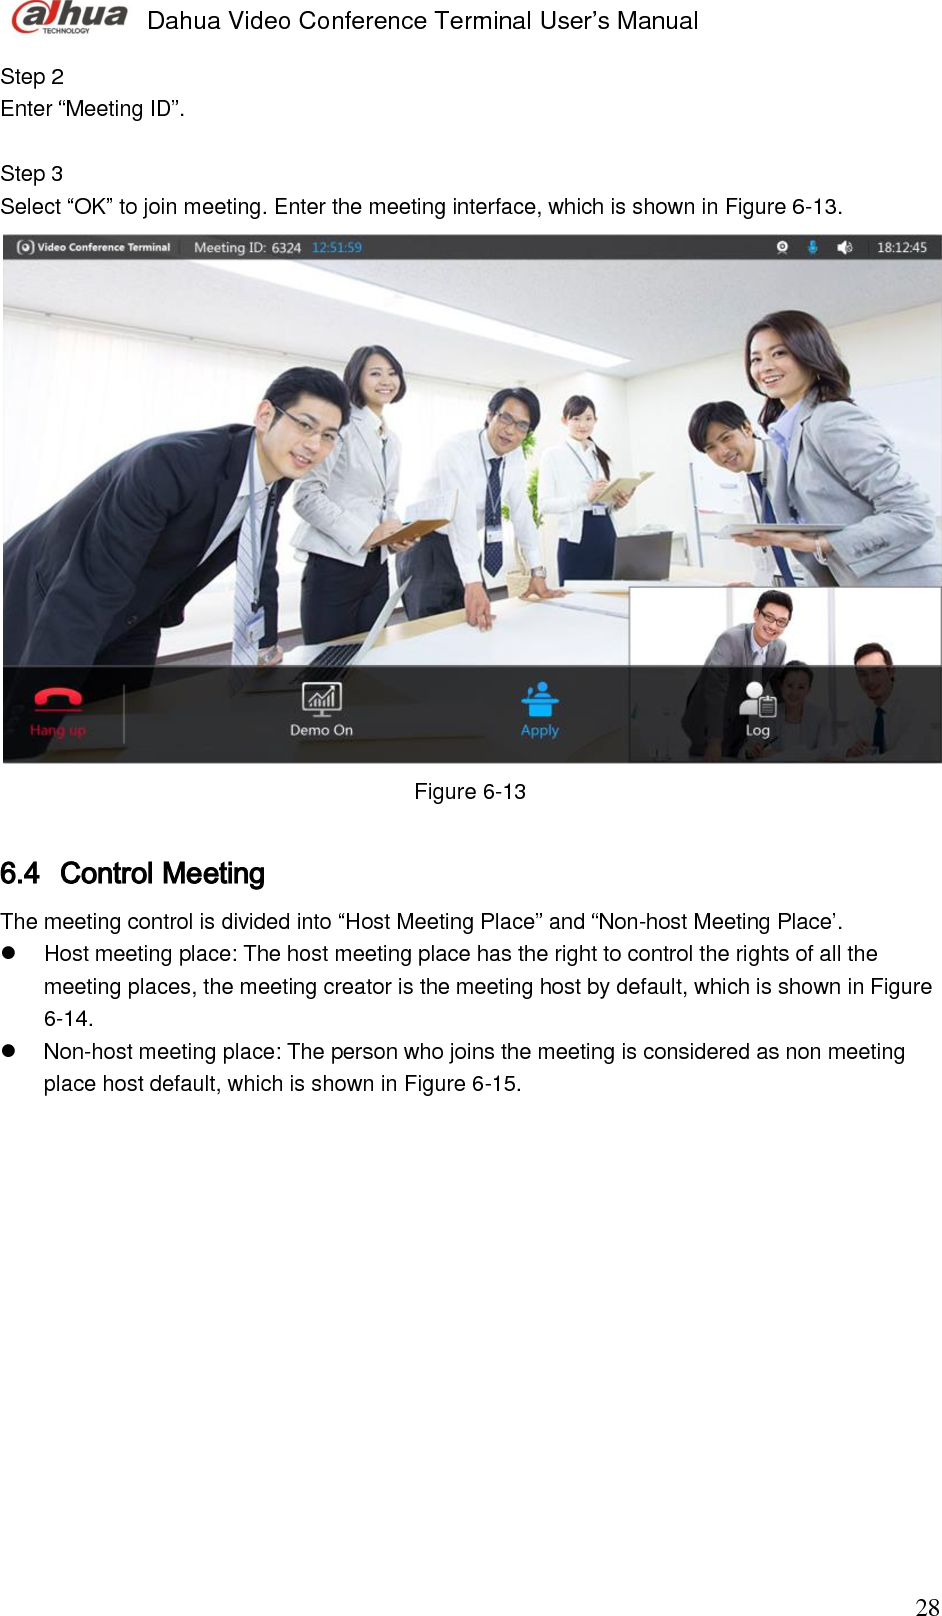  Dahua Video Conference Terminal User’s Manual                                                                              28 Step 2  Enter “Meeting ID”.  Step 3  Select “OK” to join meeting. Enter the meeting interface, which is shown in Figure 6-13.   Figure 6-13  6.4 Control Meeting The meeting control is divided into “Host Meeting Place” and “Non-host Meeting Place’.    Host meeting place: The host meeting place has the right to control the rights of all the meeting places, the meeting creator is the meeting host by default, which is shown in Figure 6-14.    Non-host meeting place: The person who joins the meeting is considered as non meeting place host default, which is shown in Figure 6-15.  